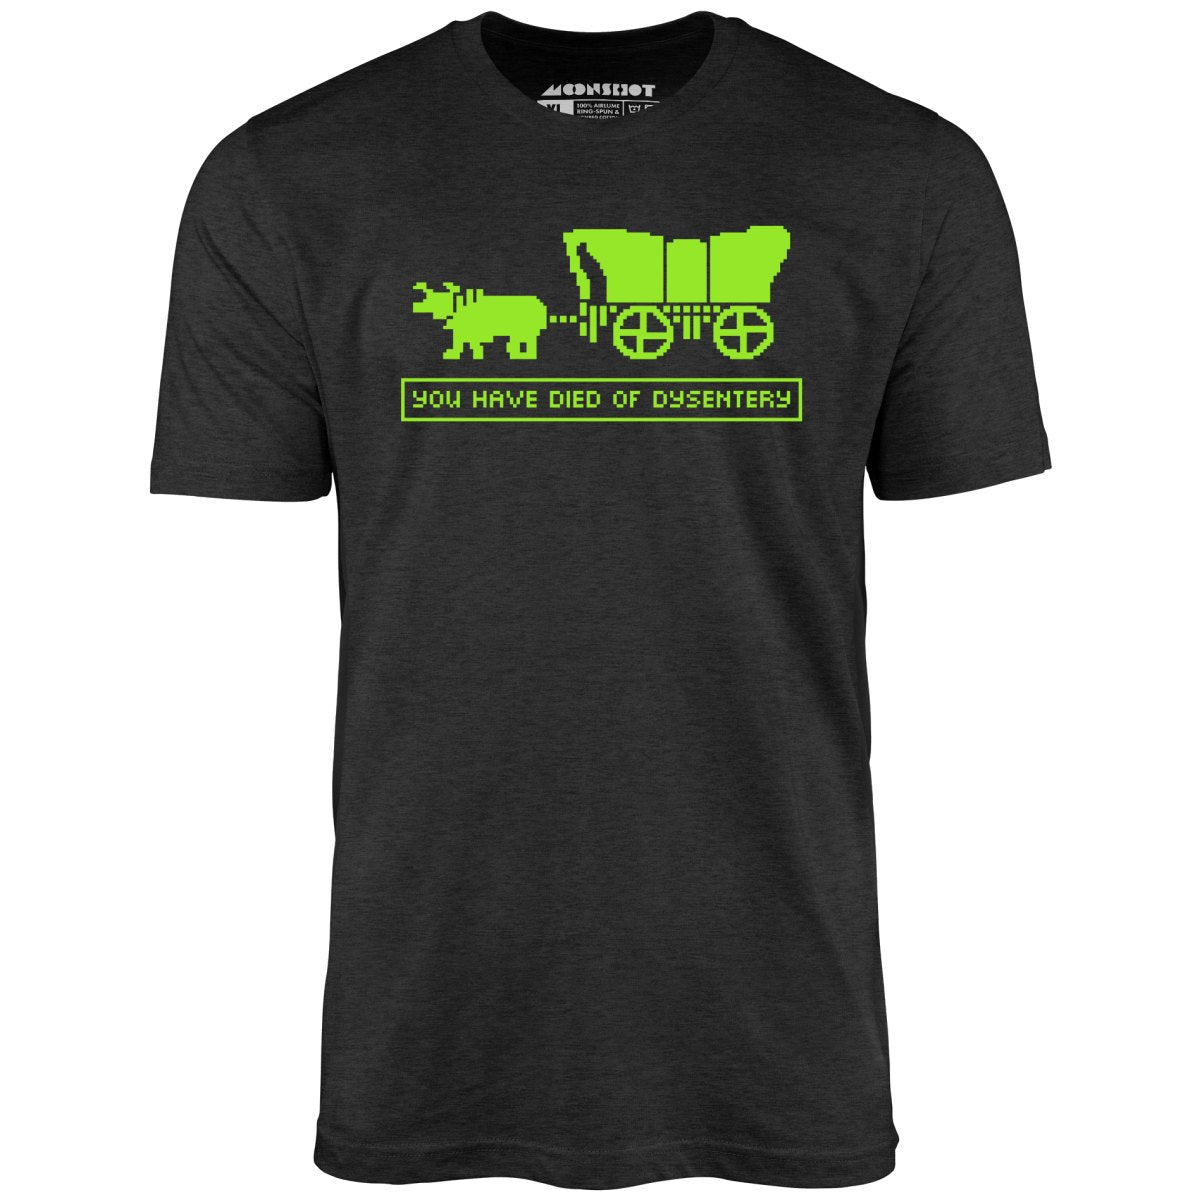 You Have Died of Dysentery - Unisex T-Shirt